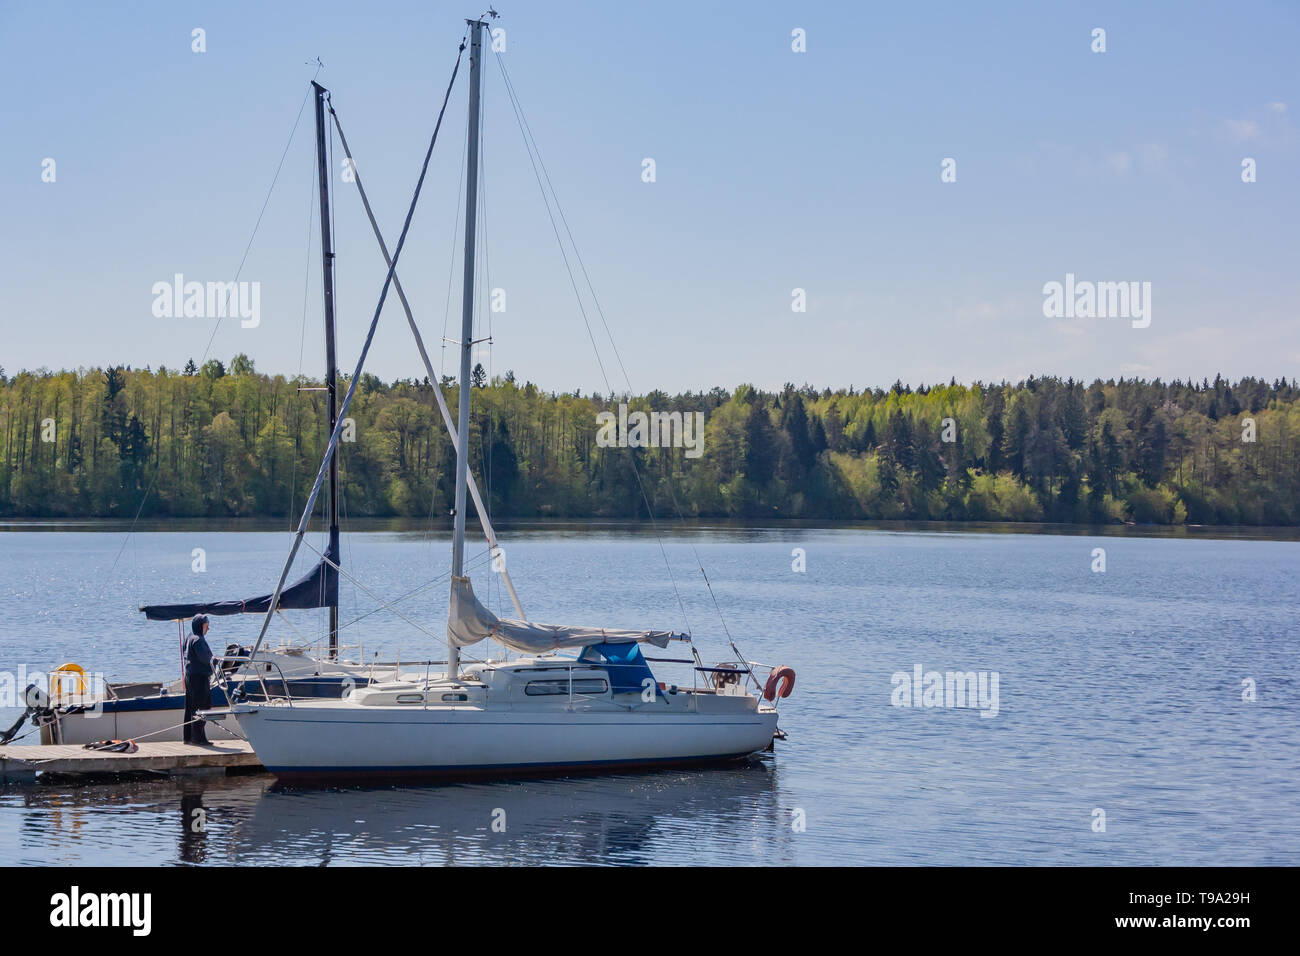 A river landscape with yachts. Moored yacht against the forest. Yacht in the river Stock Photo